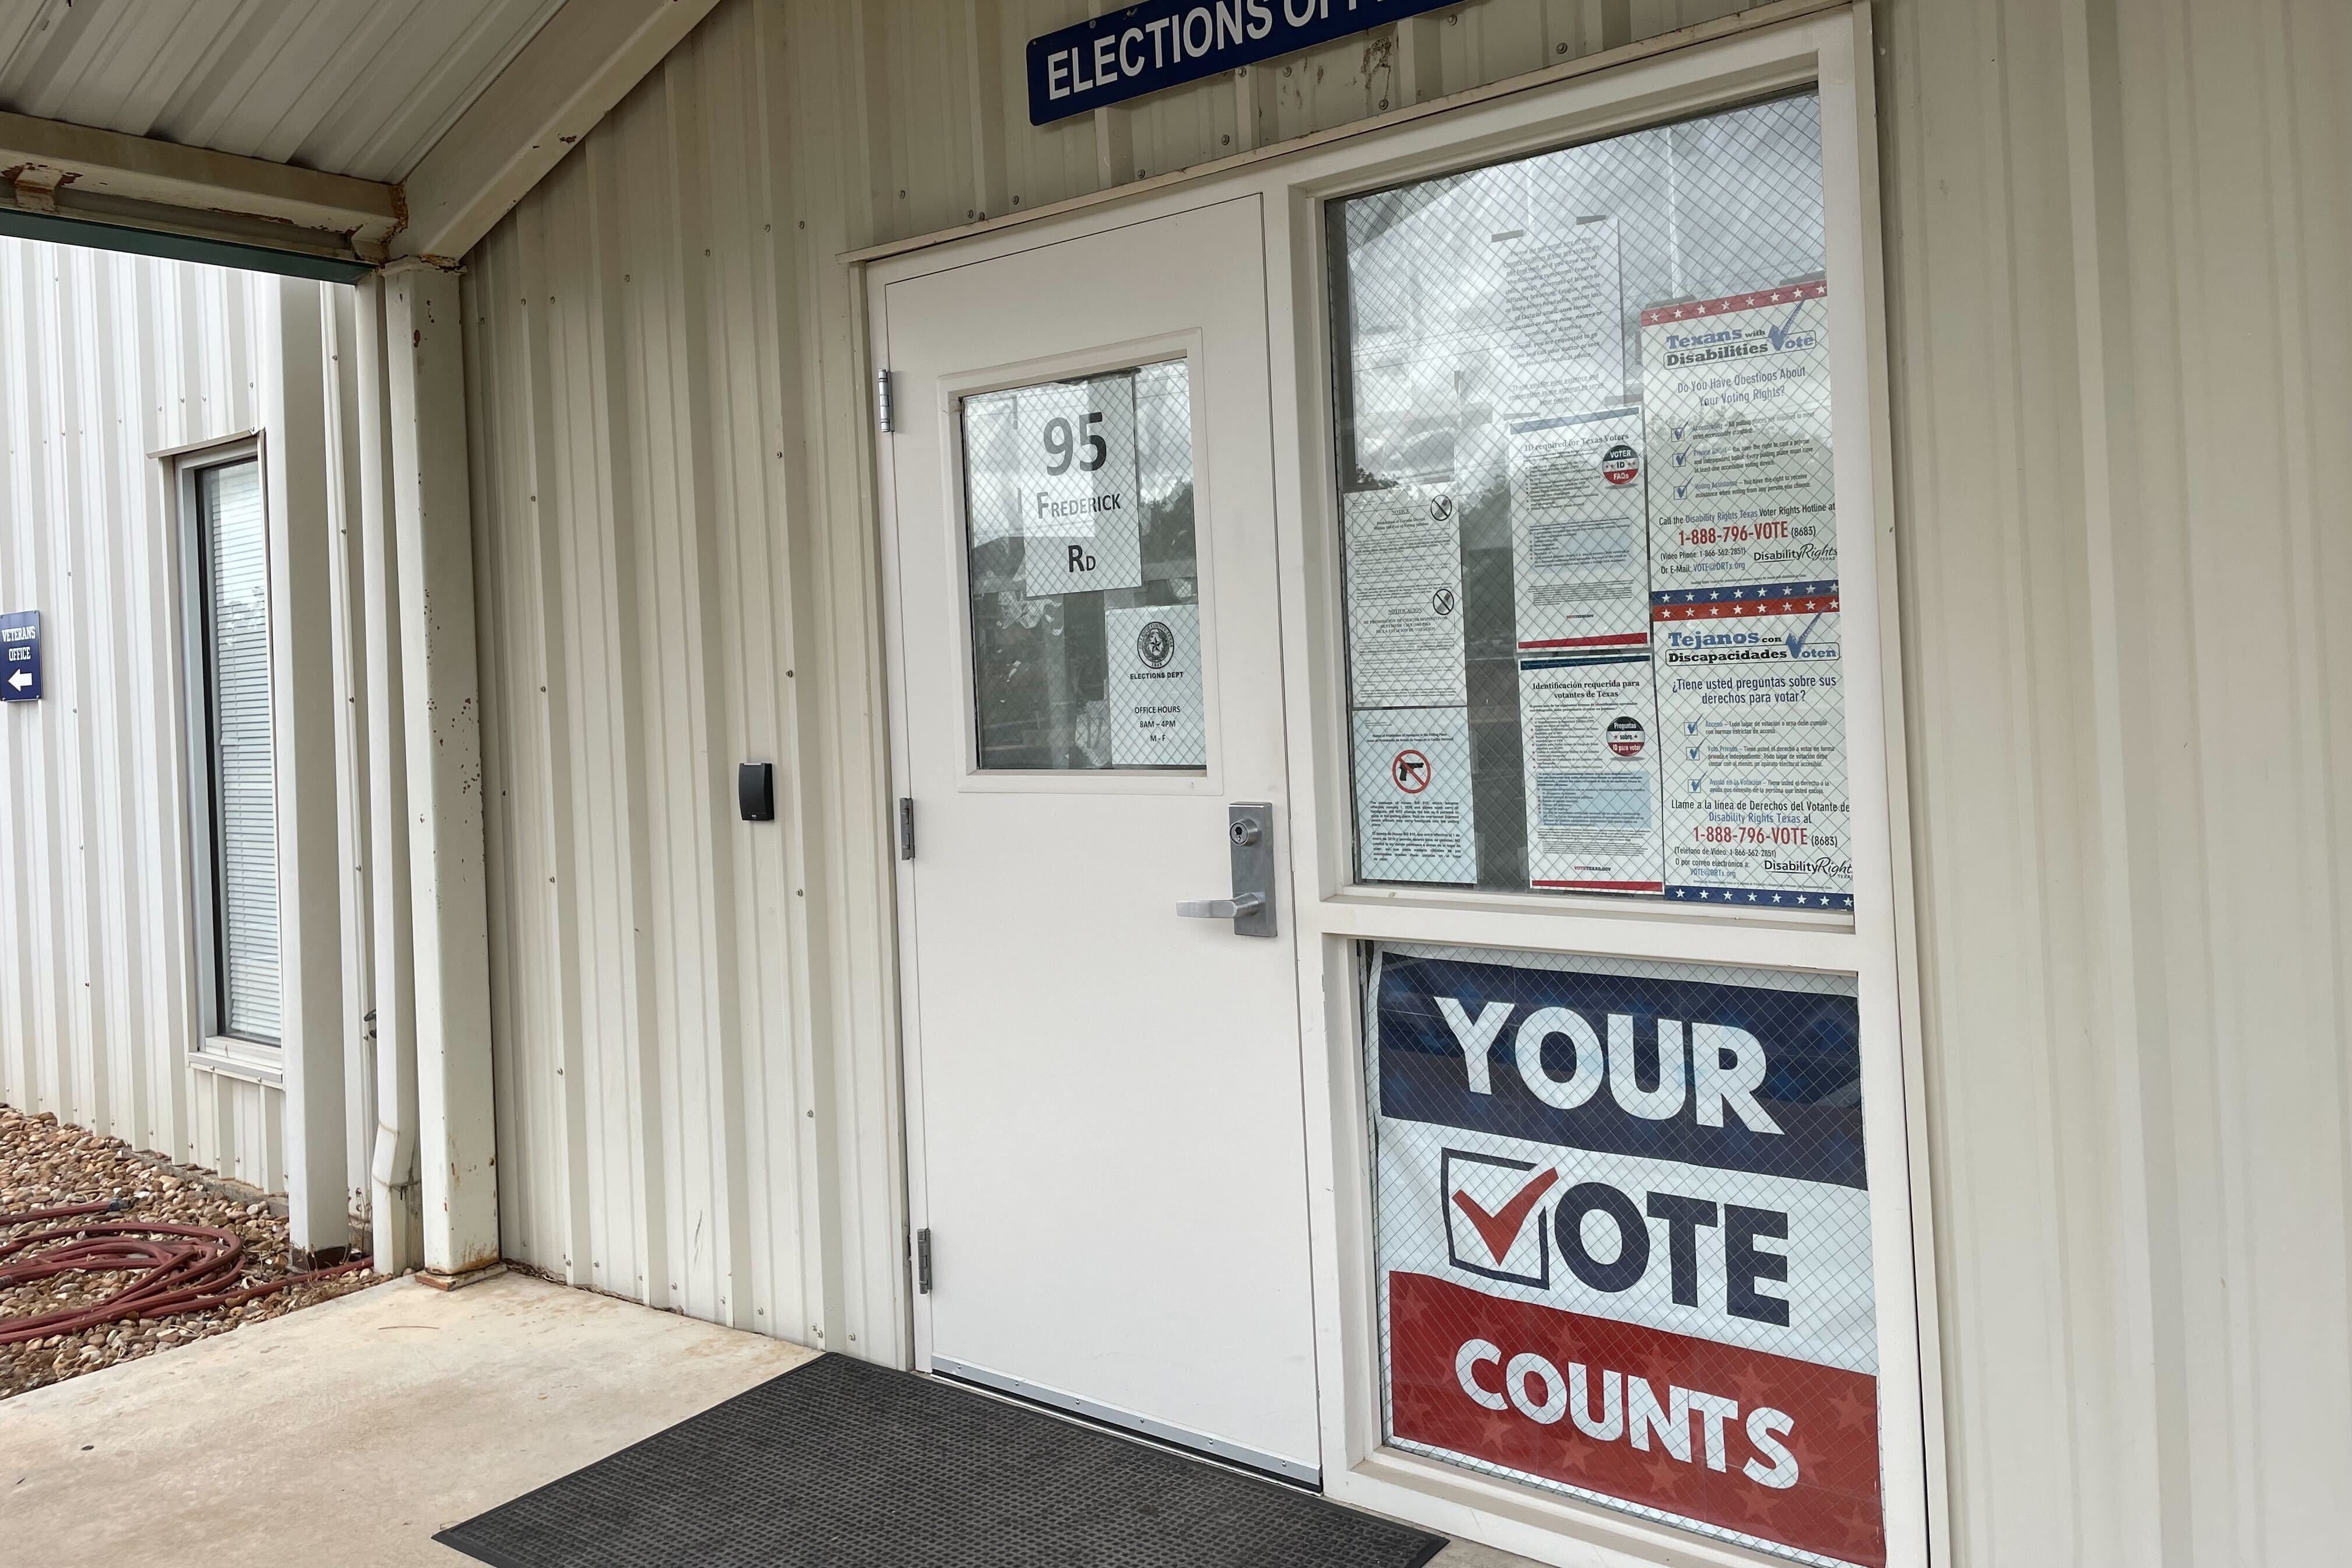 A door and window of a white building with signs reading “Your Vote Counts” and “Elections Office”